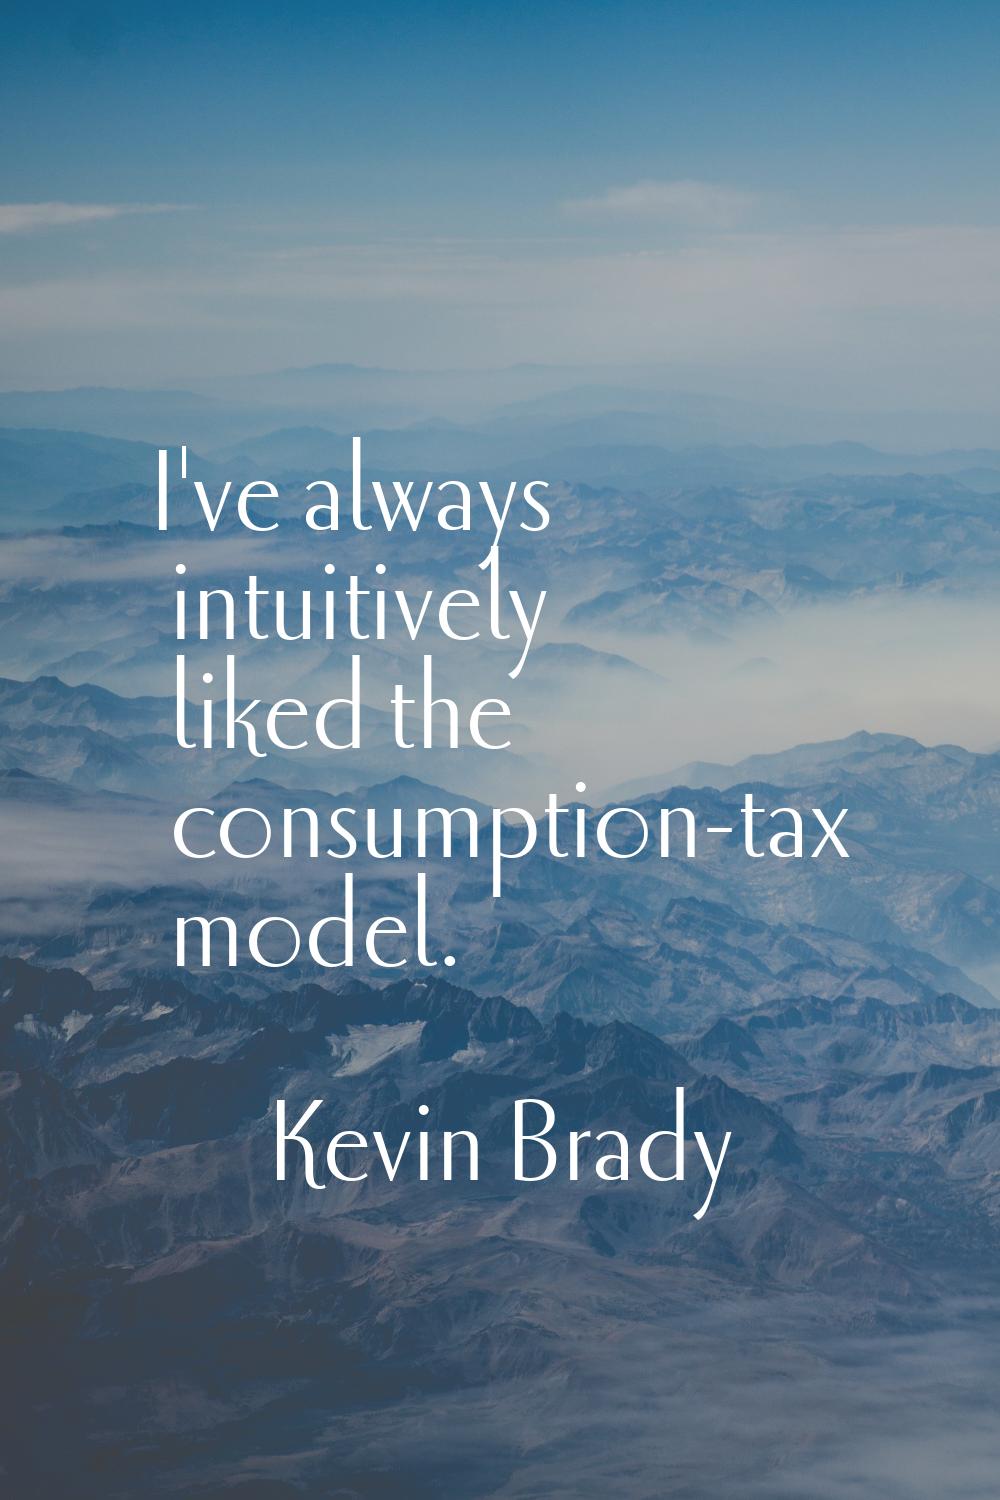 I've always intuitively liked the consumption-tax model.